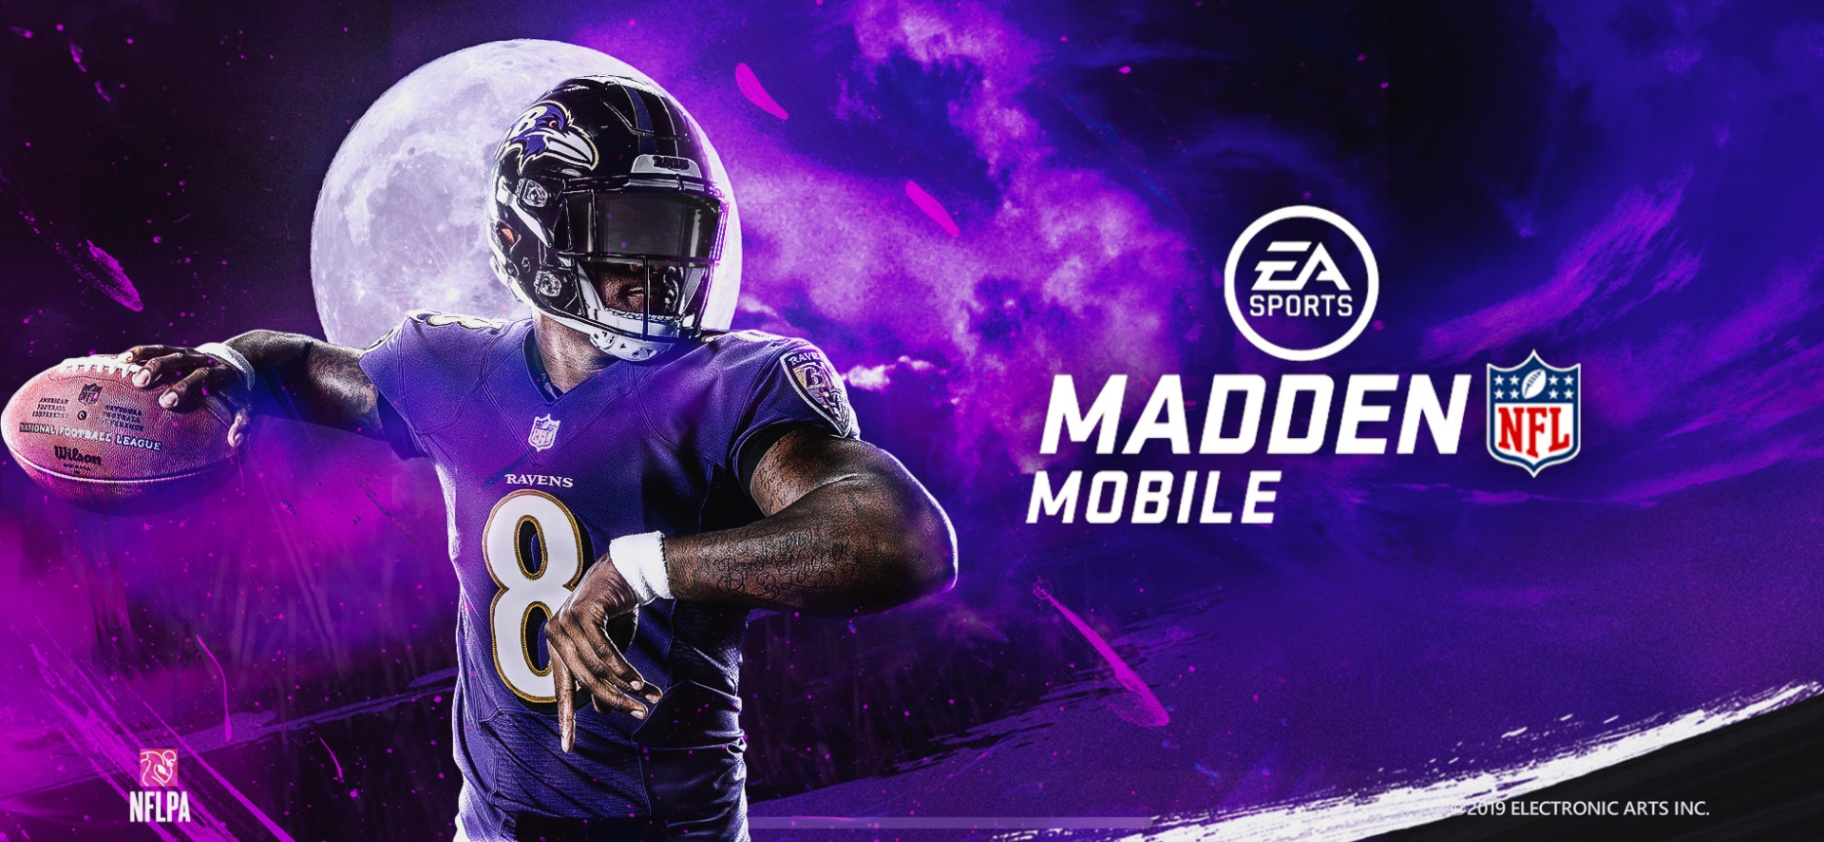 Madden NFL 21 Mobile - Learn How to Create a Customized Character, Tips and More